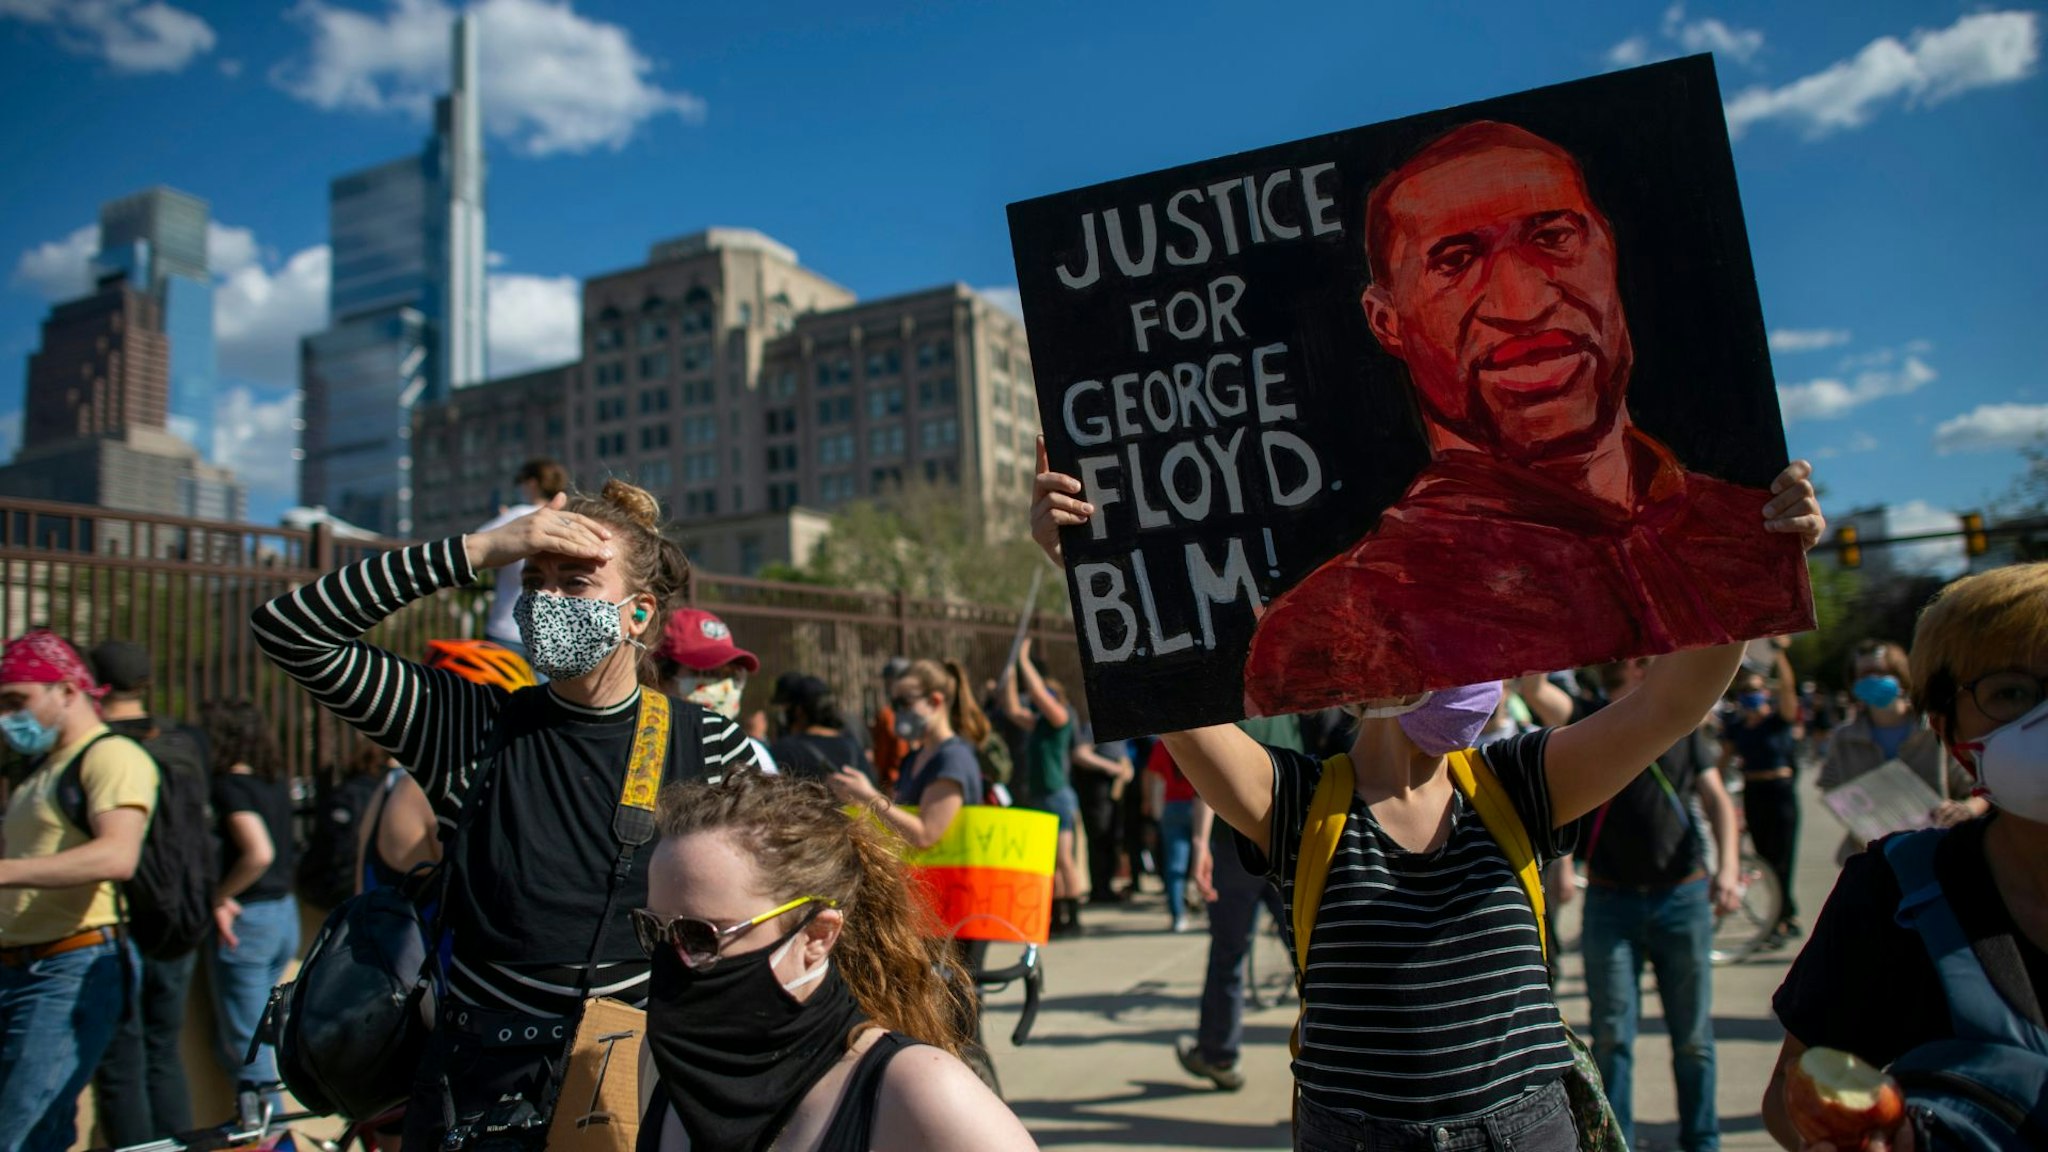 PHILADELPHIA, PA - JUNE 01: A protester holds a tribute poster to George Lloyd after a march through Center City on June 1, 2020 in Philadelphia, Pennsylvania. Demonstrations have erupted all across the country in response to George Floyd's death in Minneapolis, Minnesota while in police custody a week ago.